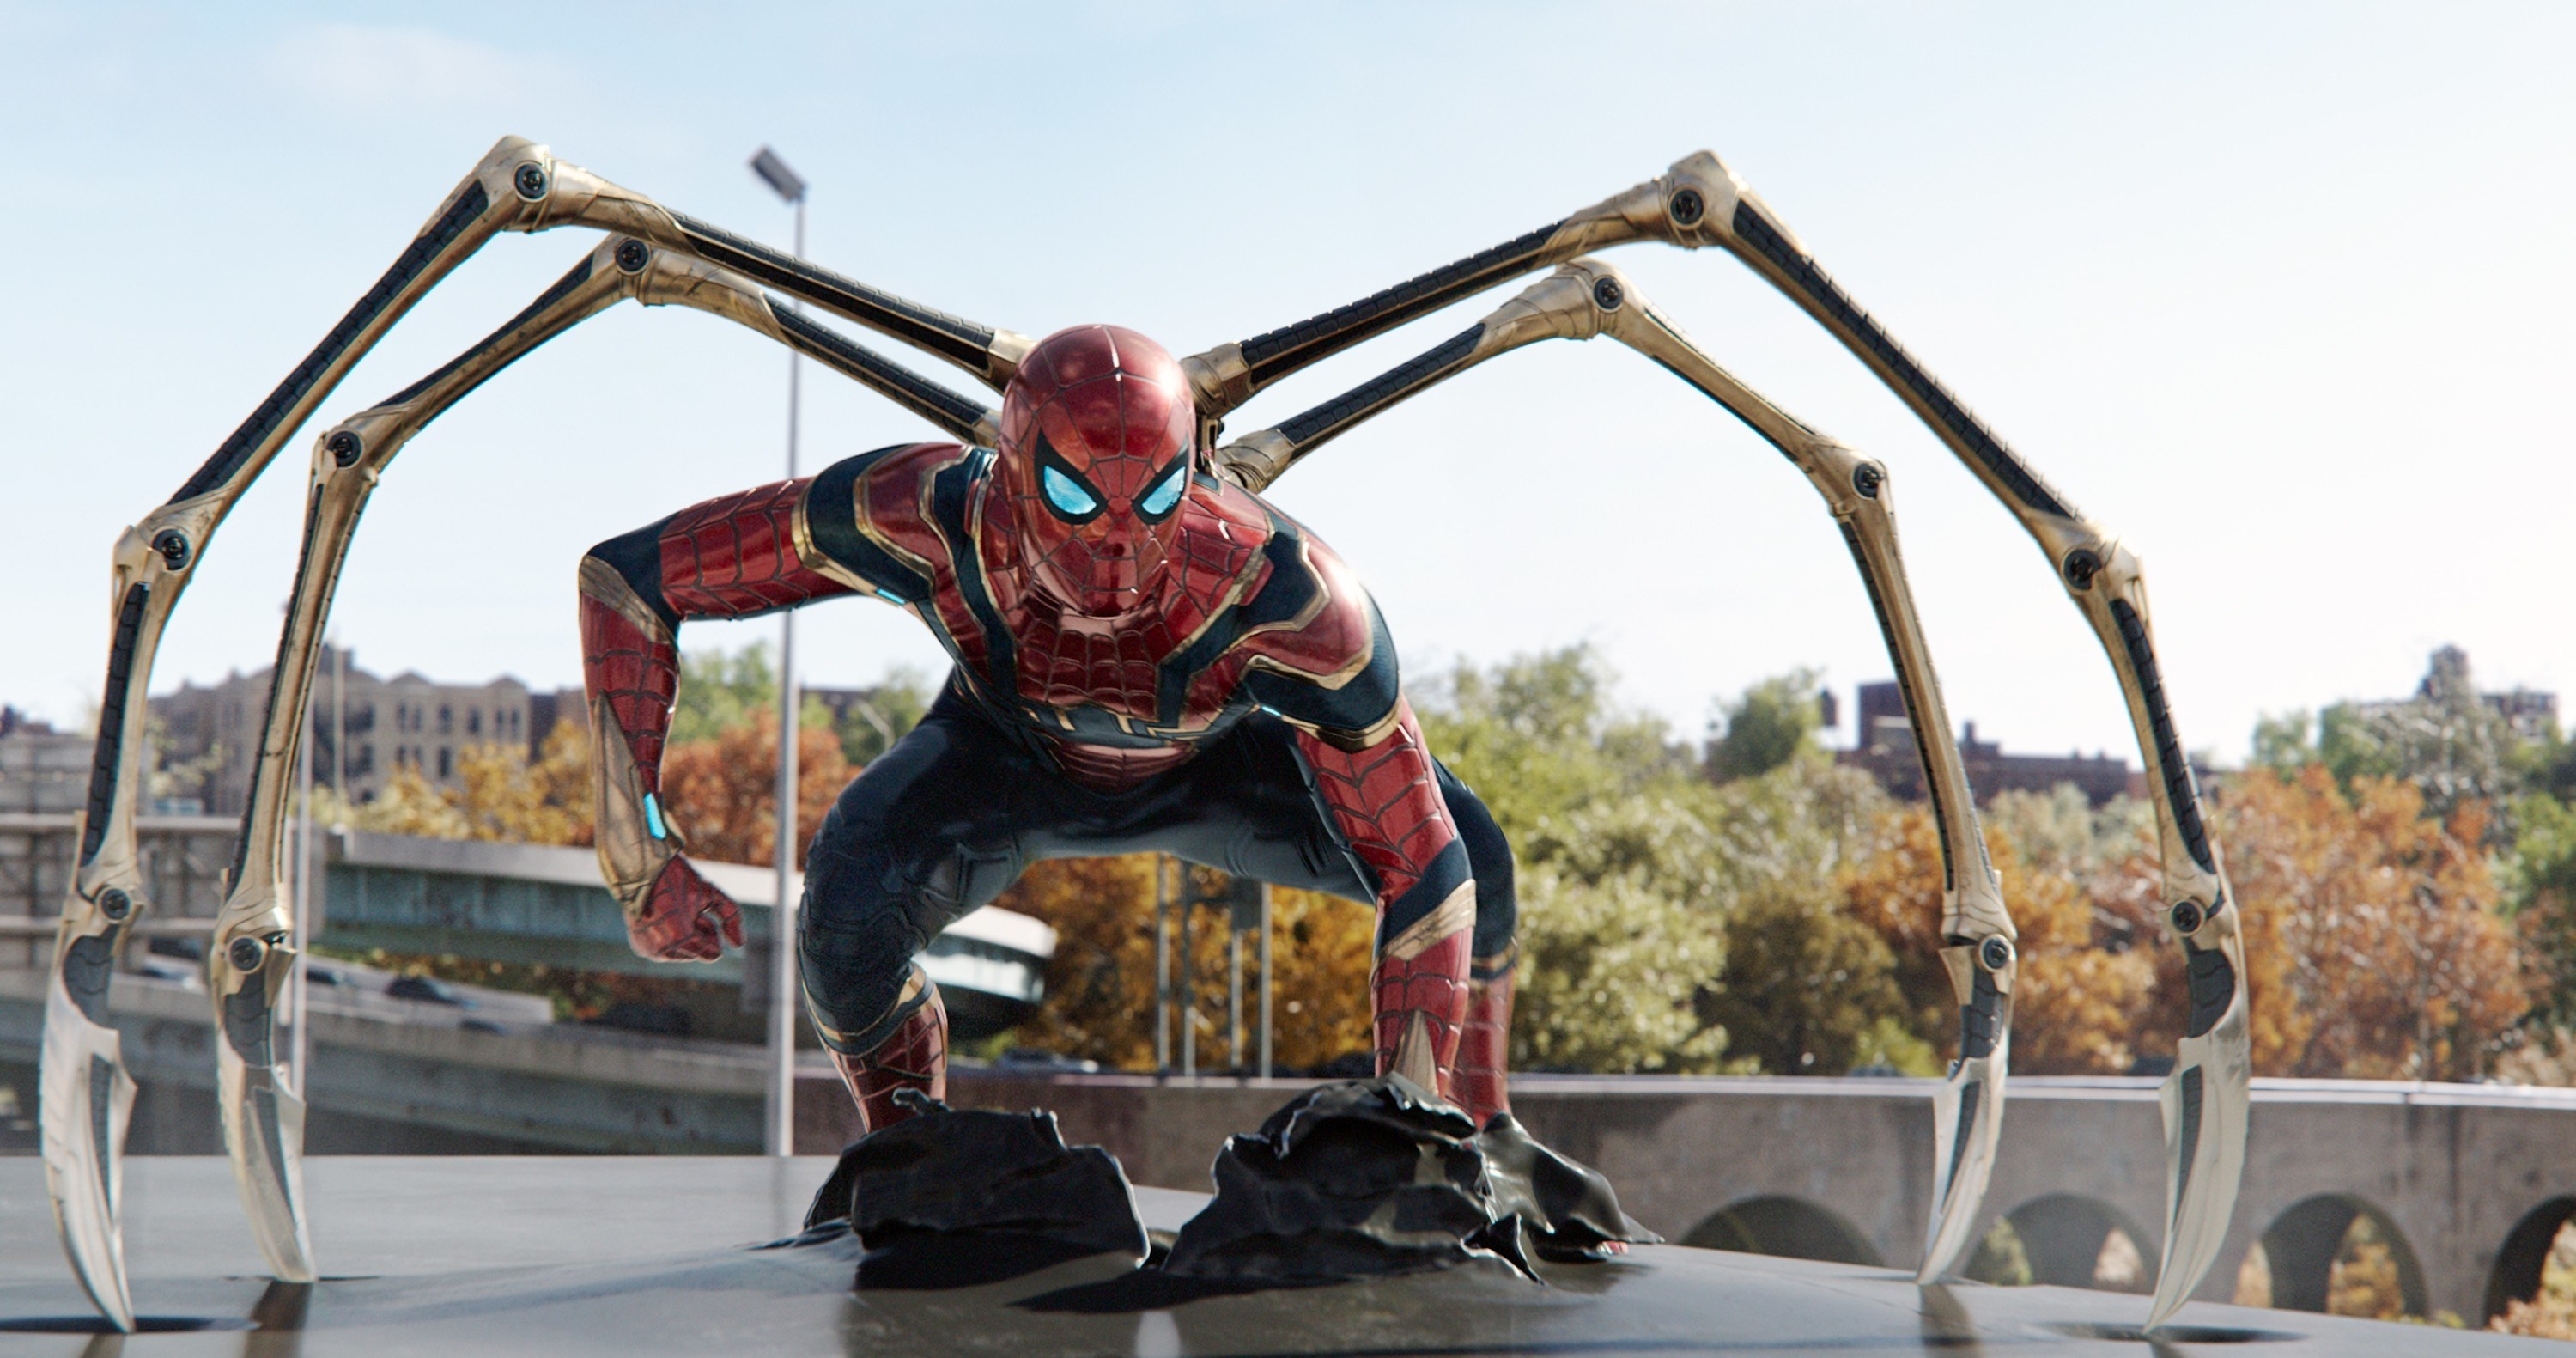 Spider-Man uses his spider suit on top of a car